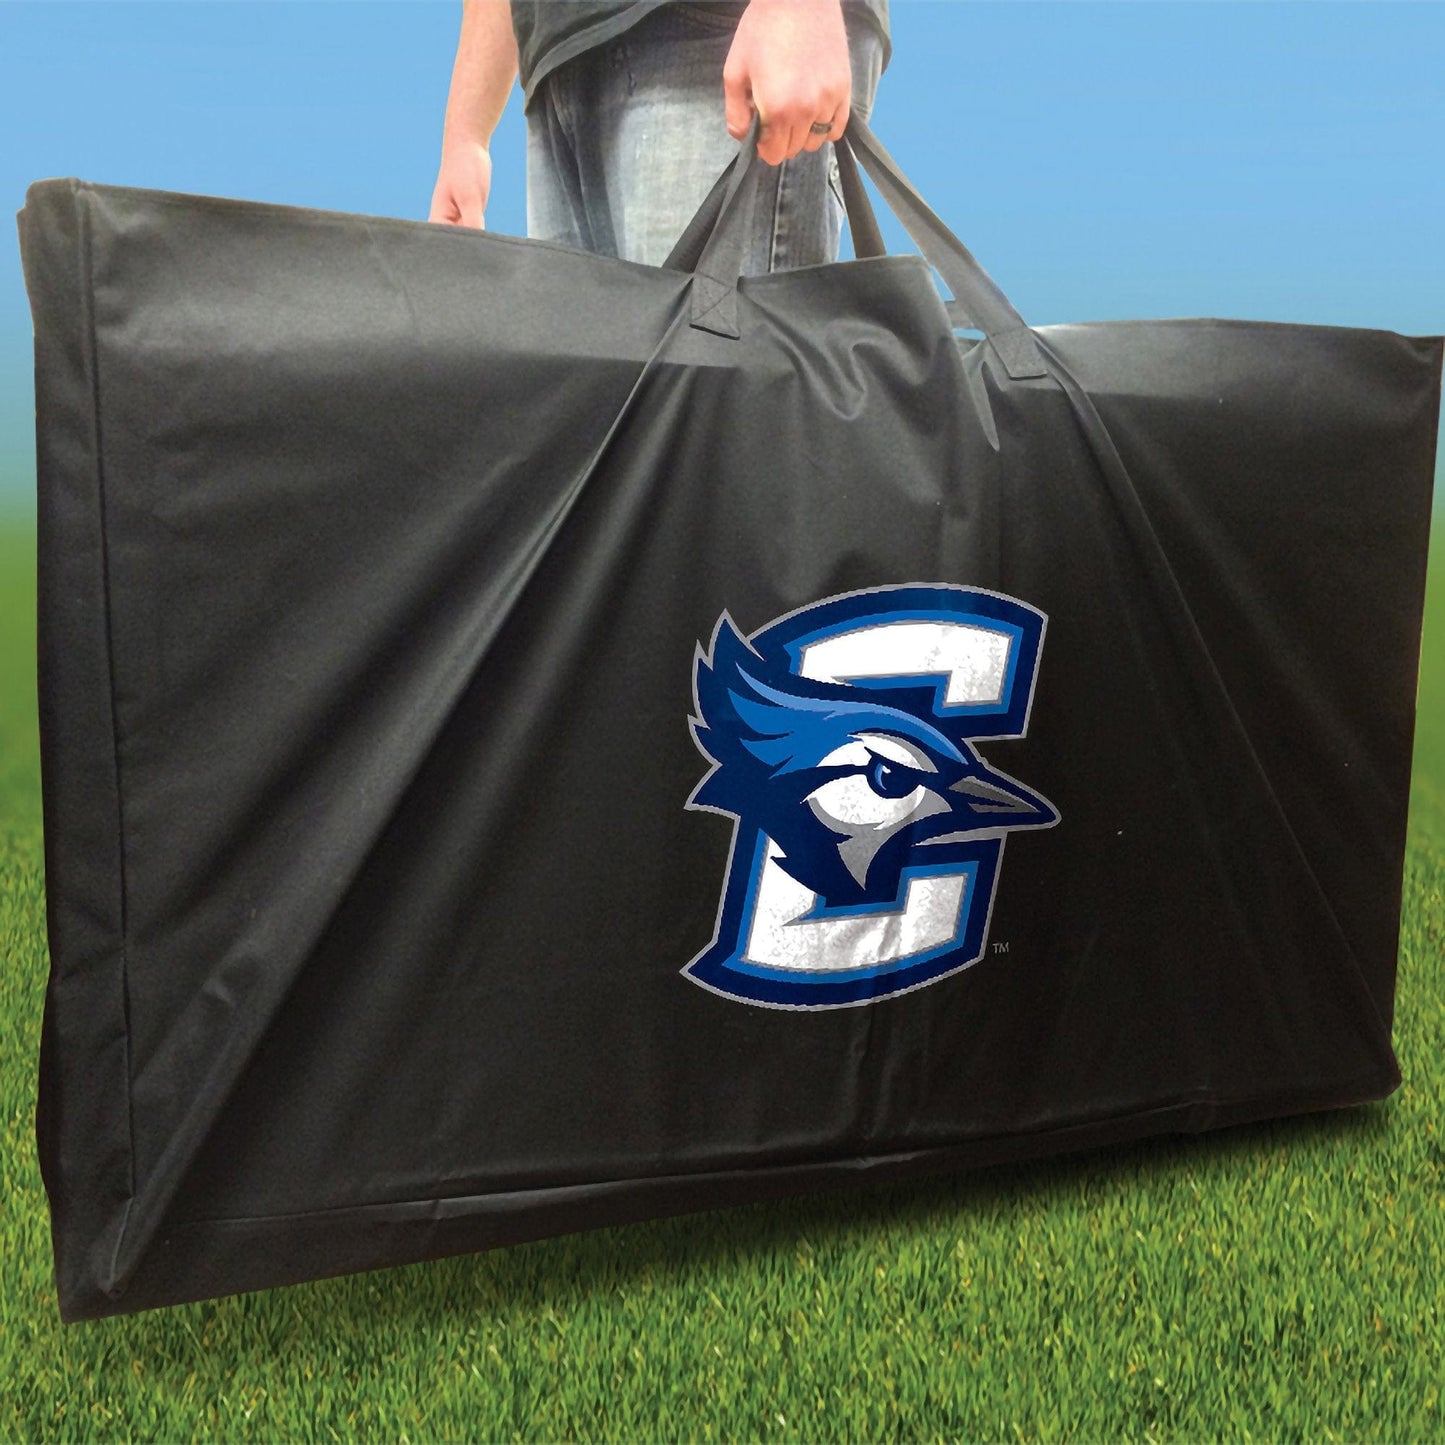 Creighton Stained Pyramid team logo carry case